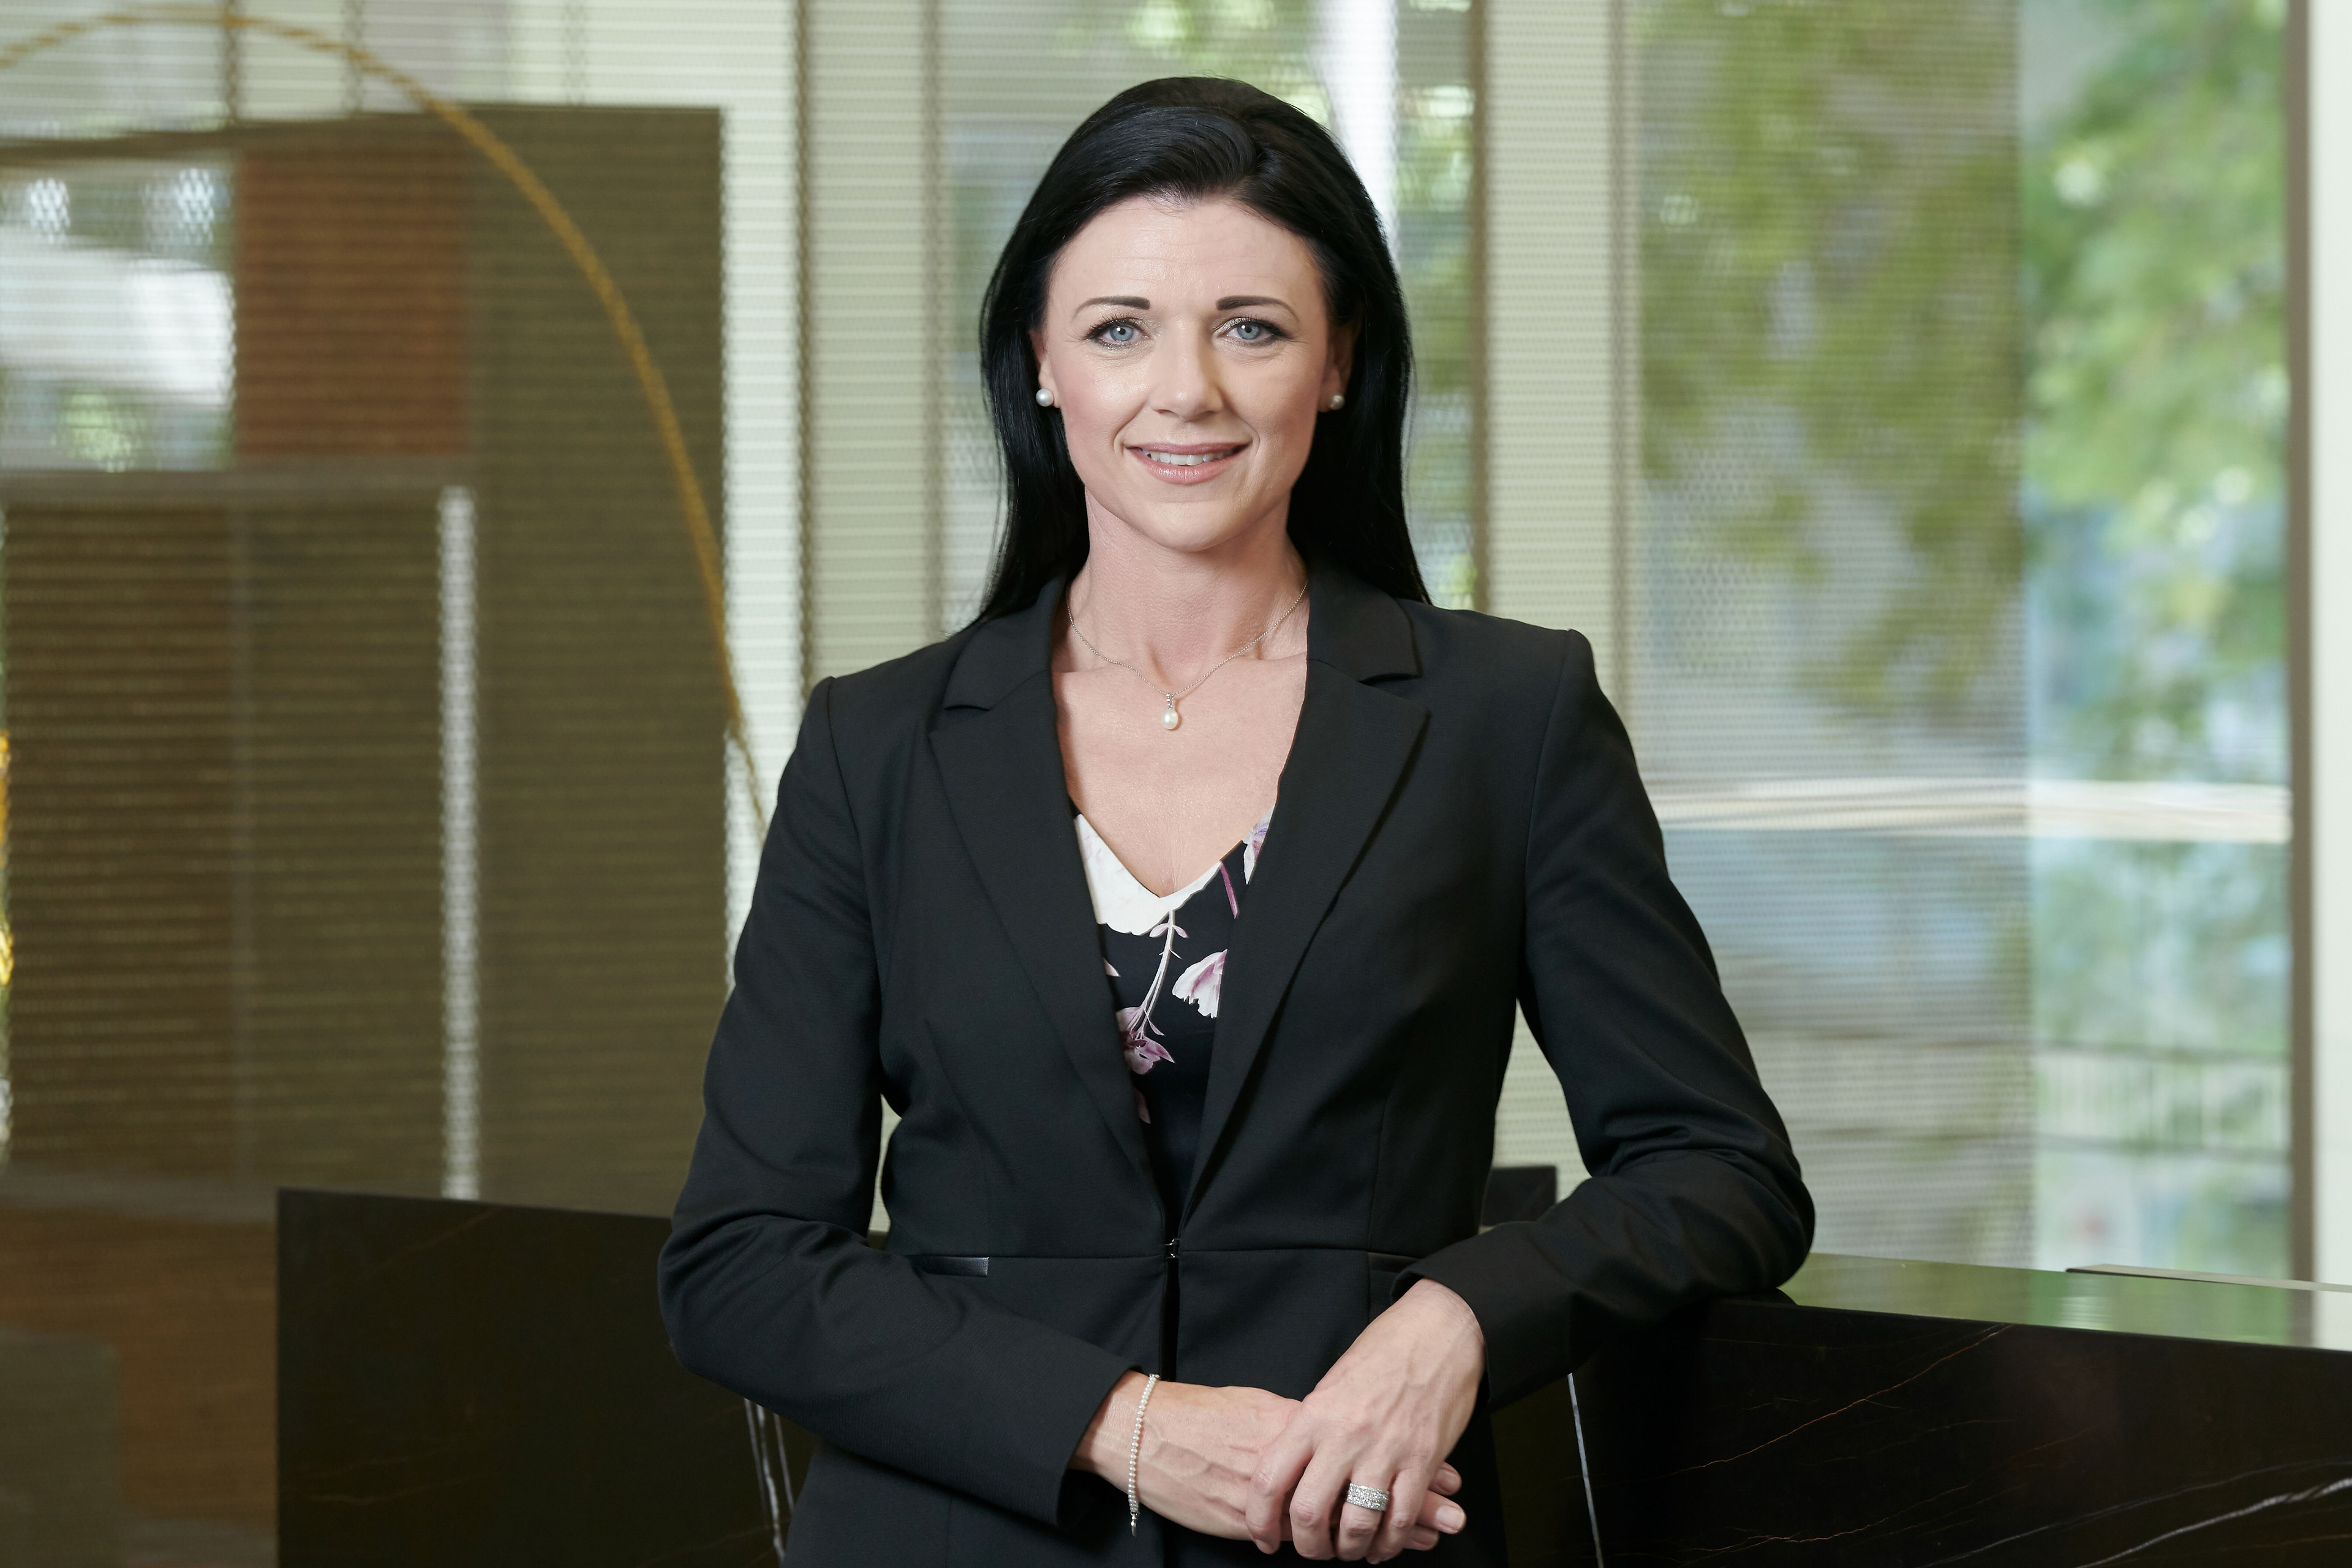 Laurie Smith Ey Australia Forensic And Integrity Services Leader Ey